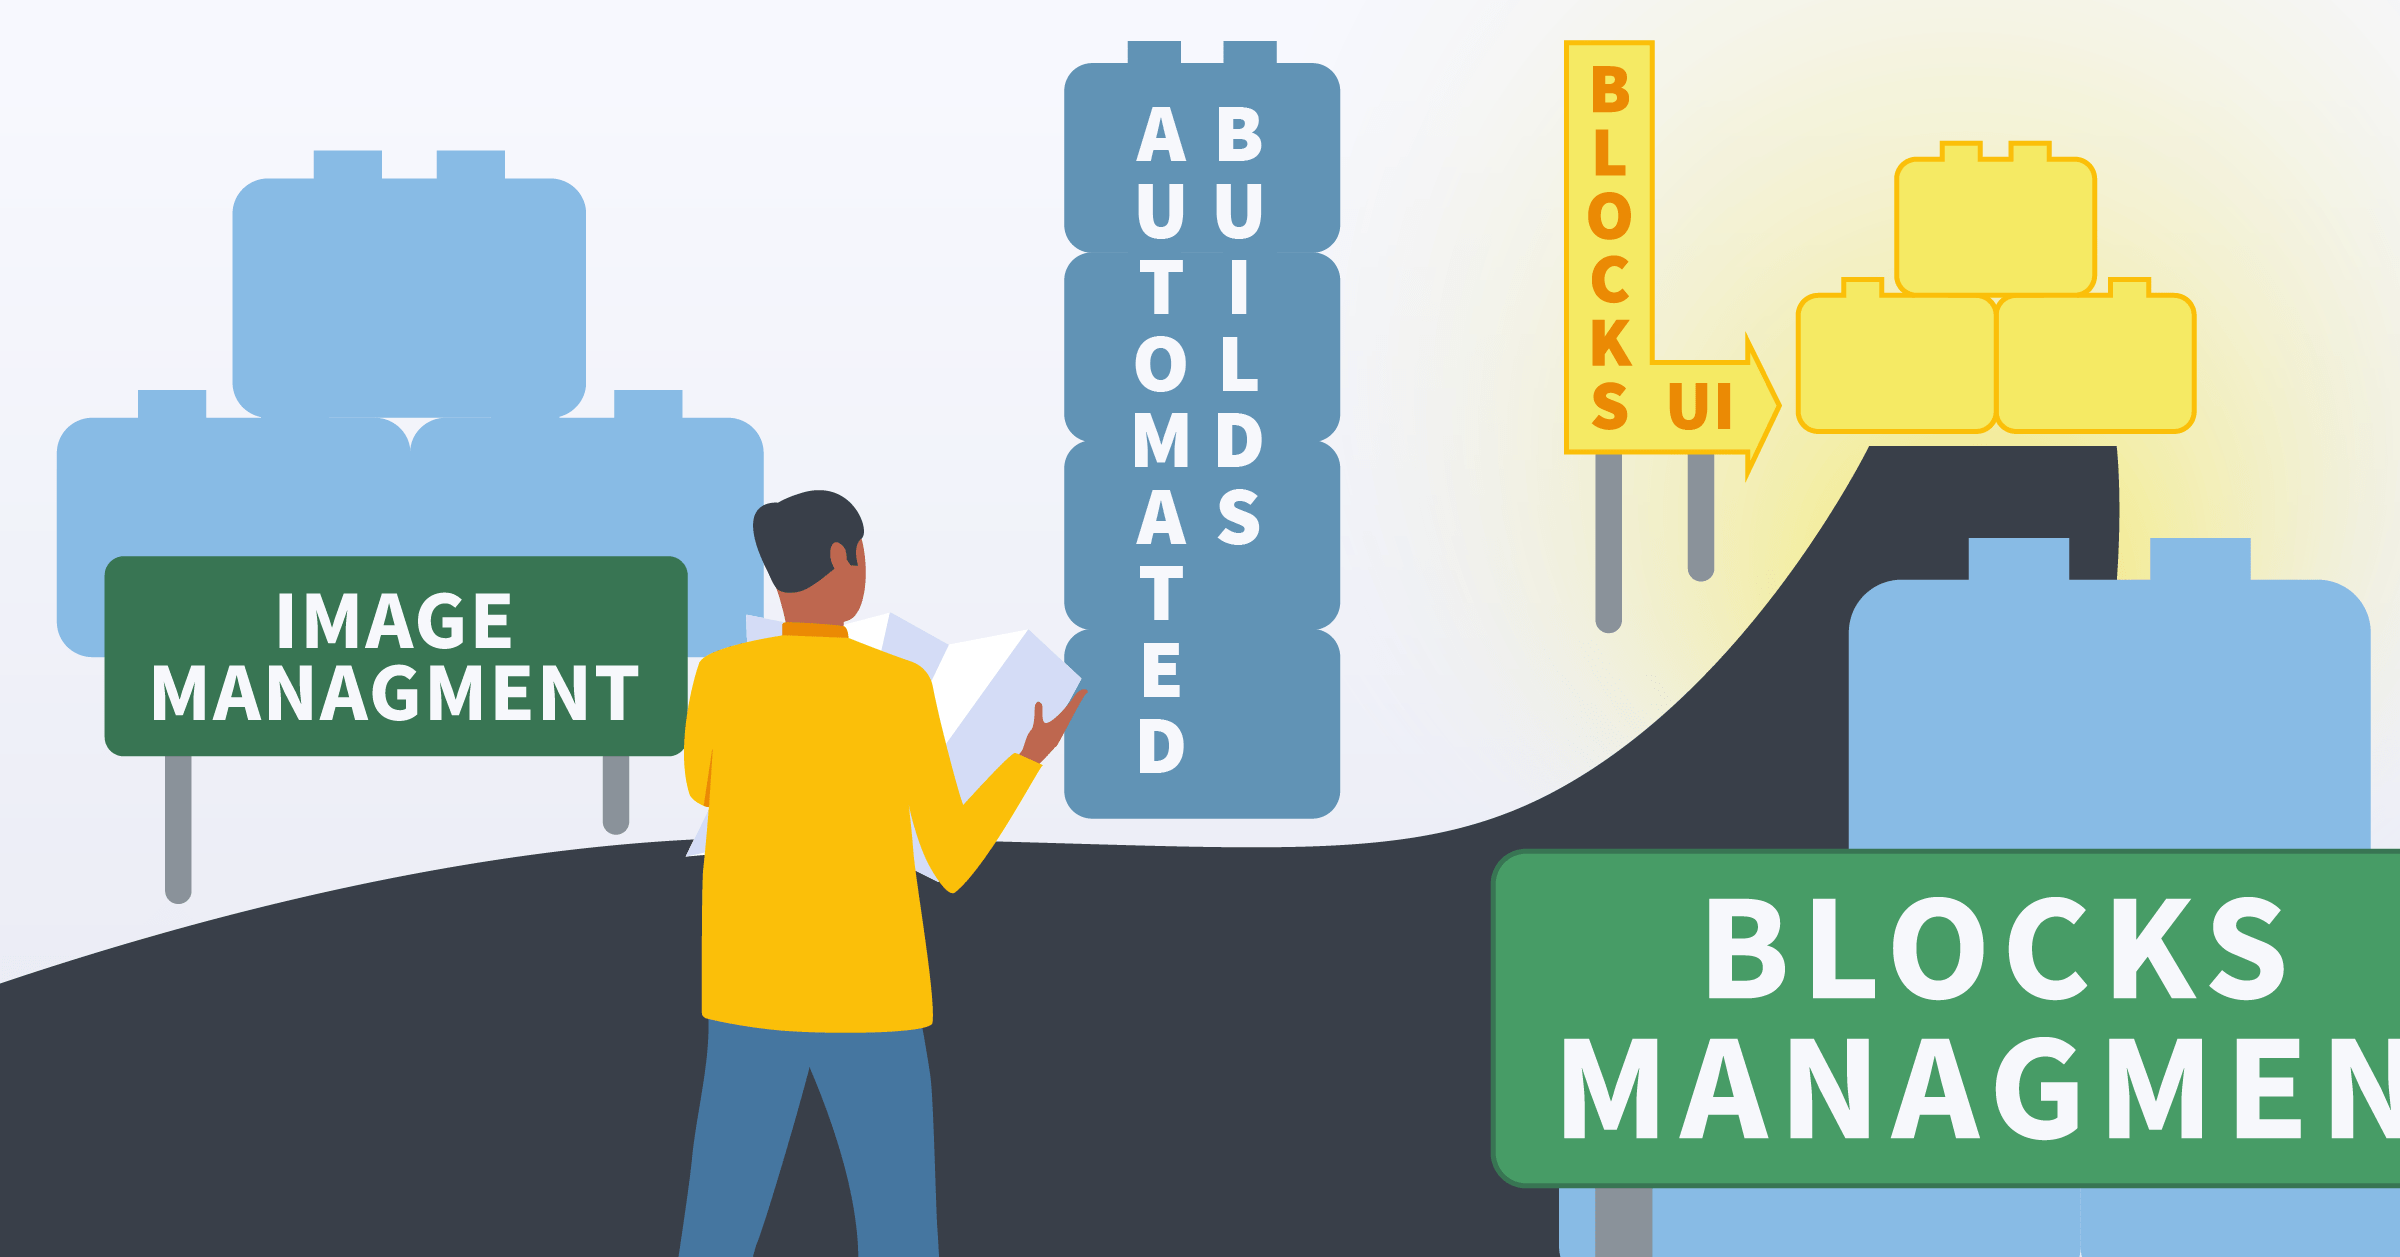 Blocks: new management functionality and a public roadmap for what’s next